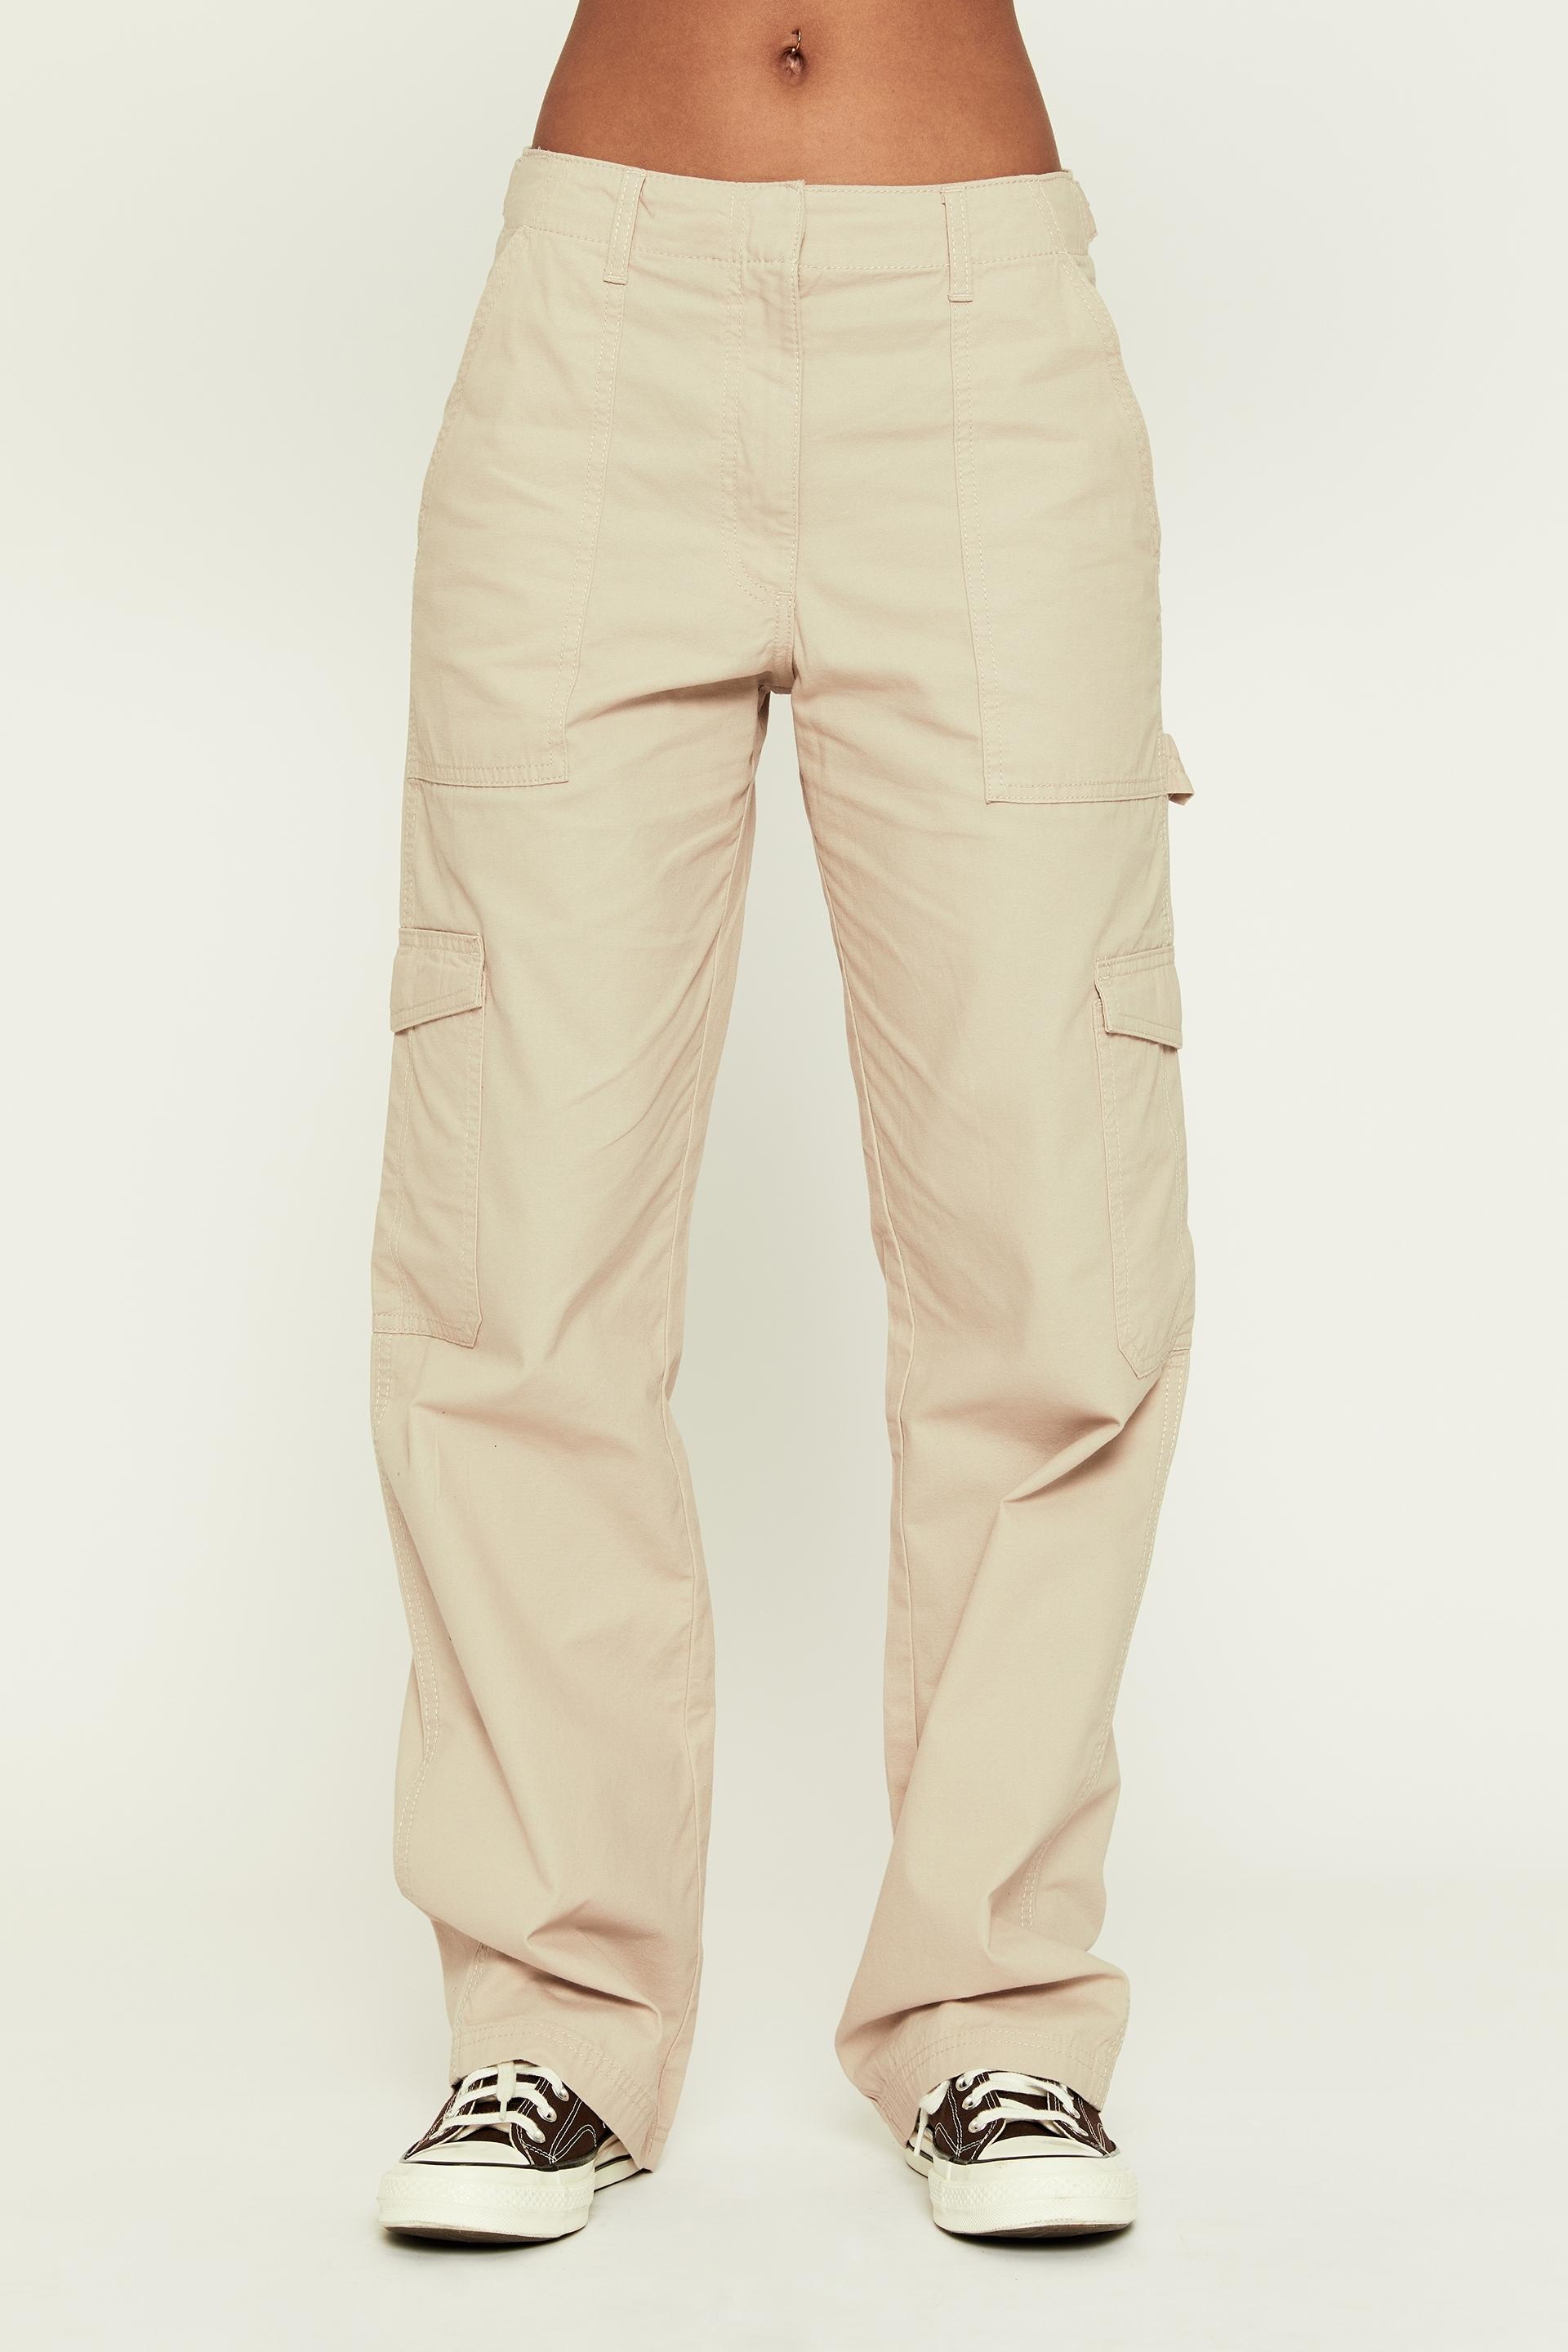 Mikayla cargo pant - soft taupe Supré Trousers | Superbalist.com